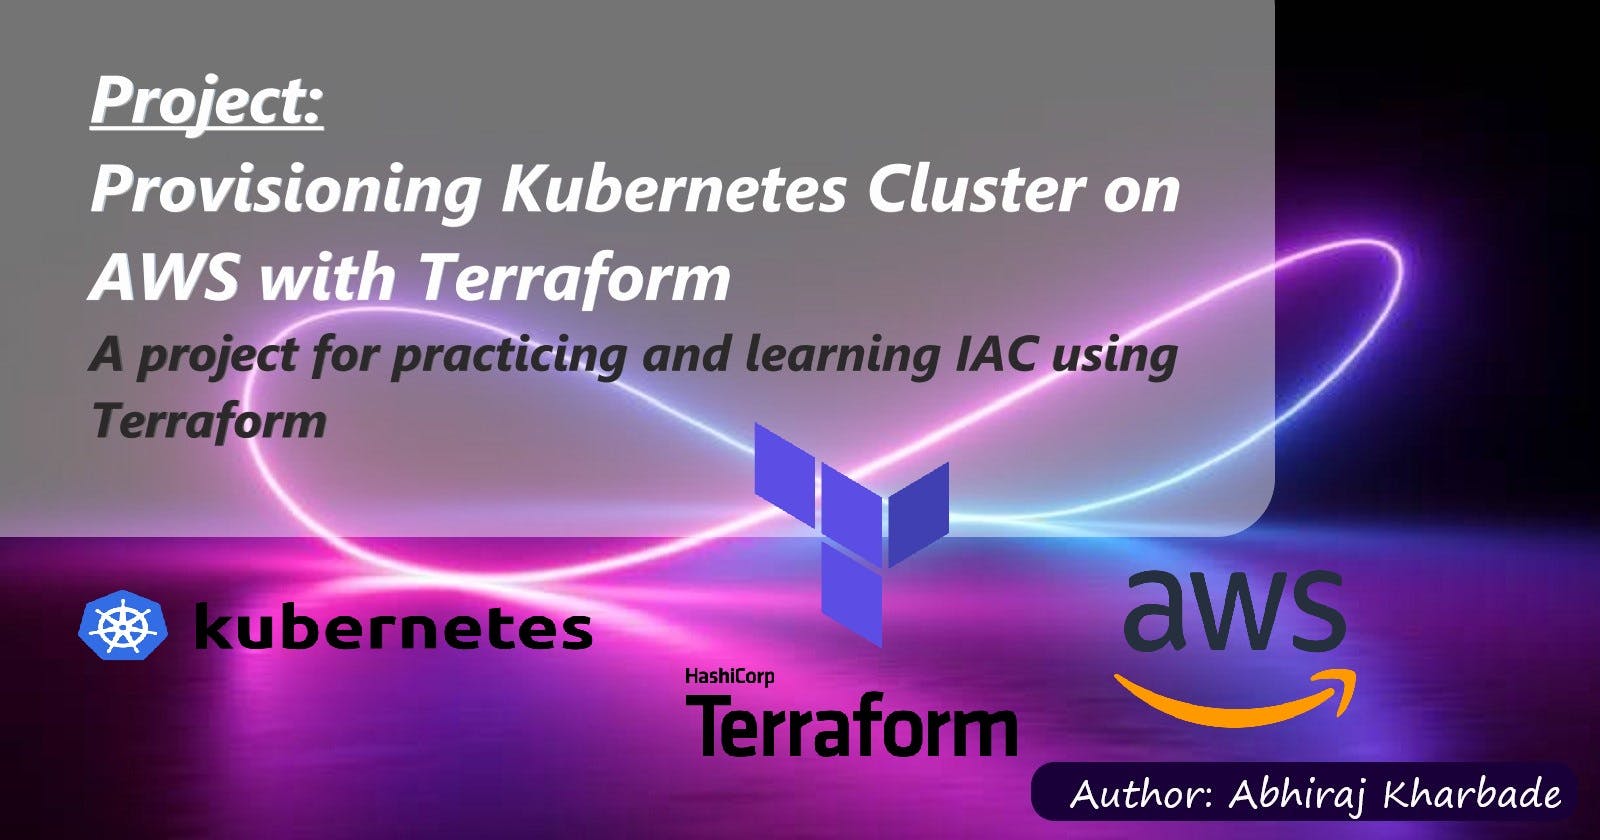 Project: Provisioning Kubernetes Cluster on AWS with Terraform